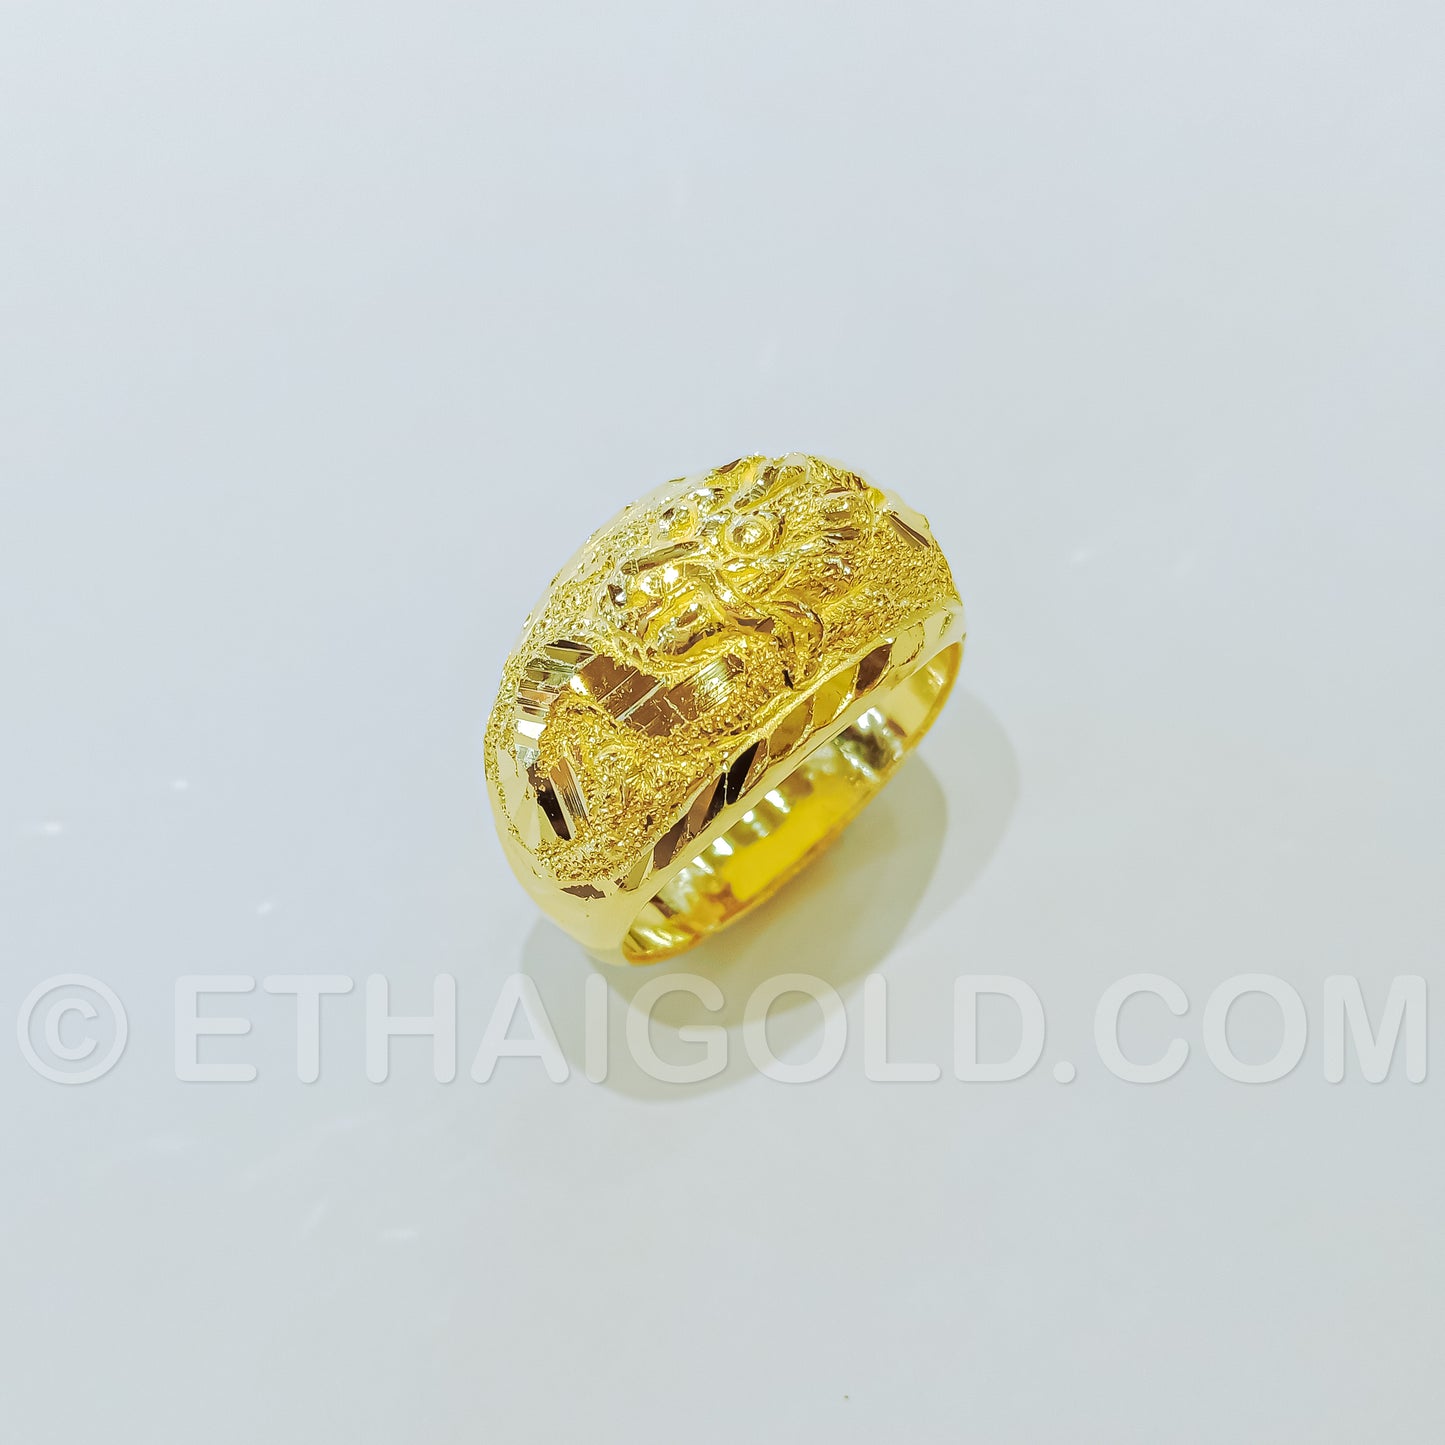 1/4 BAHT POLISHED SPARKLING DIAMOND-CUT HOLLOW DRAGON RING IN 23K GOLD (ID: R1301S)